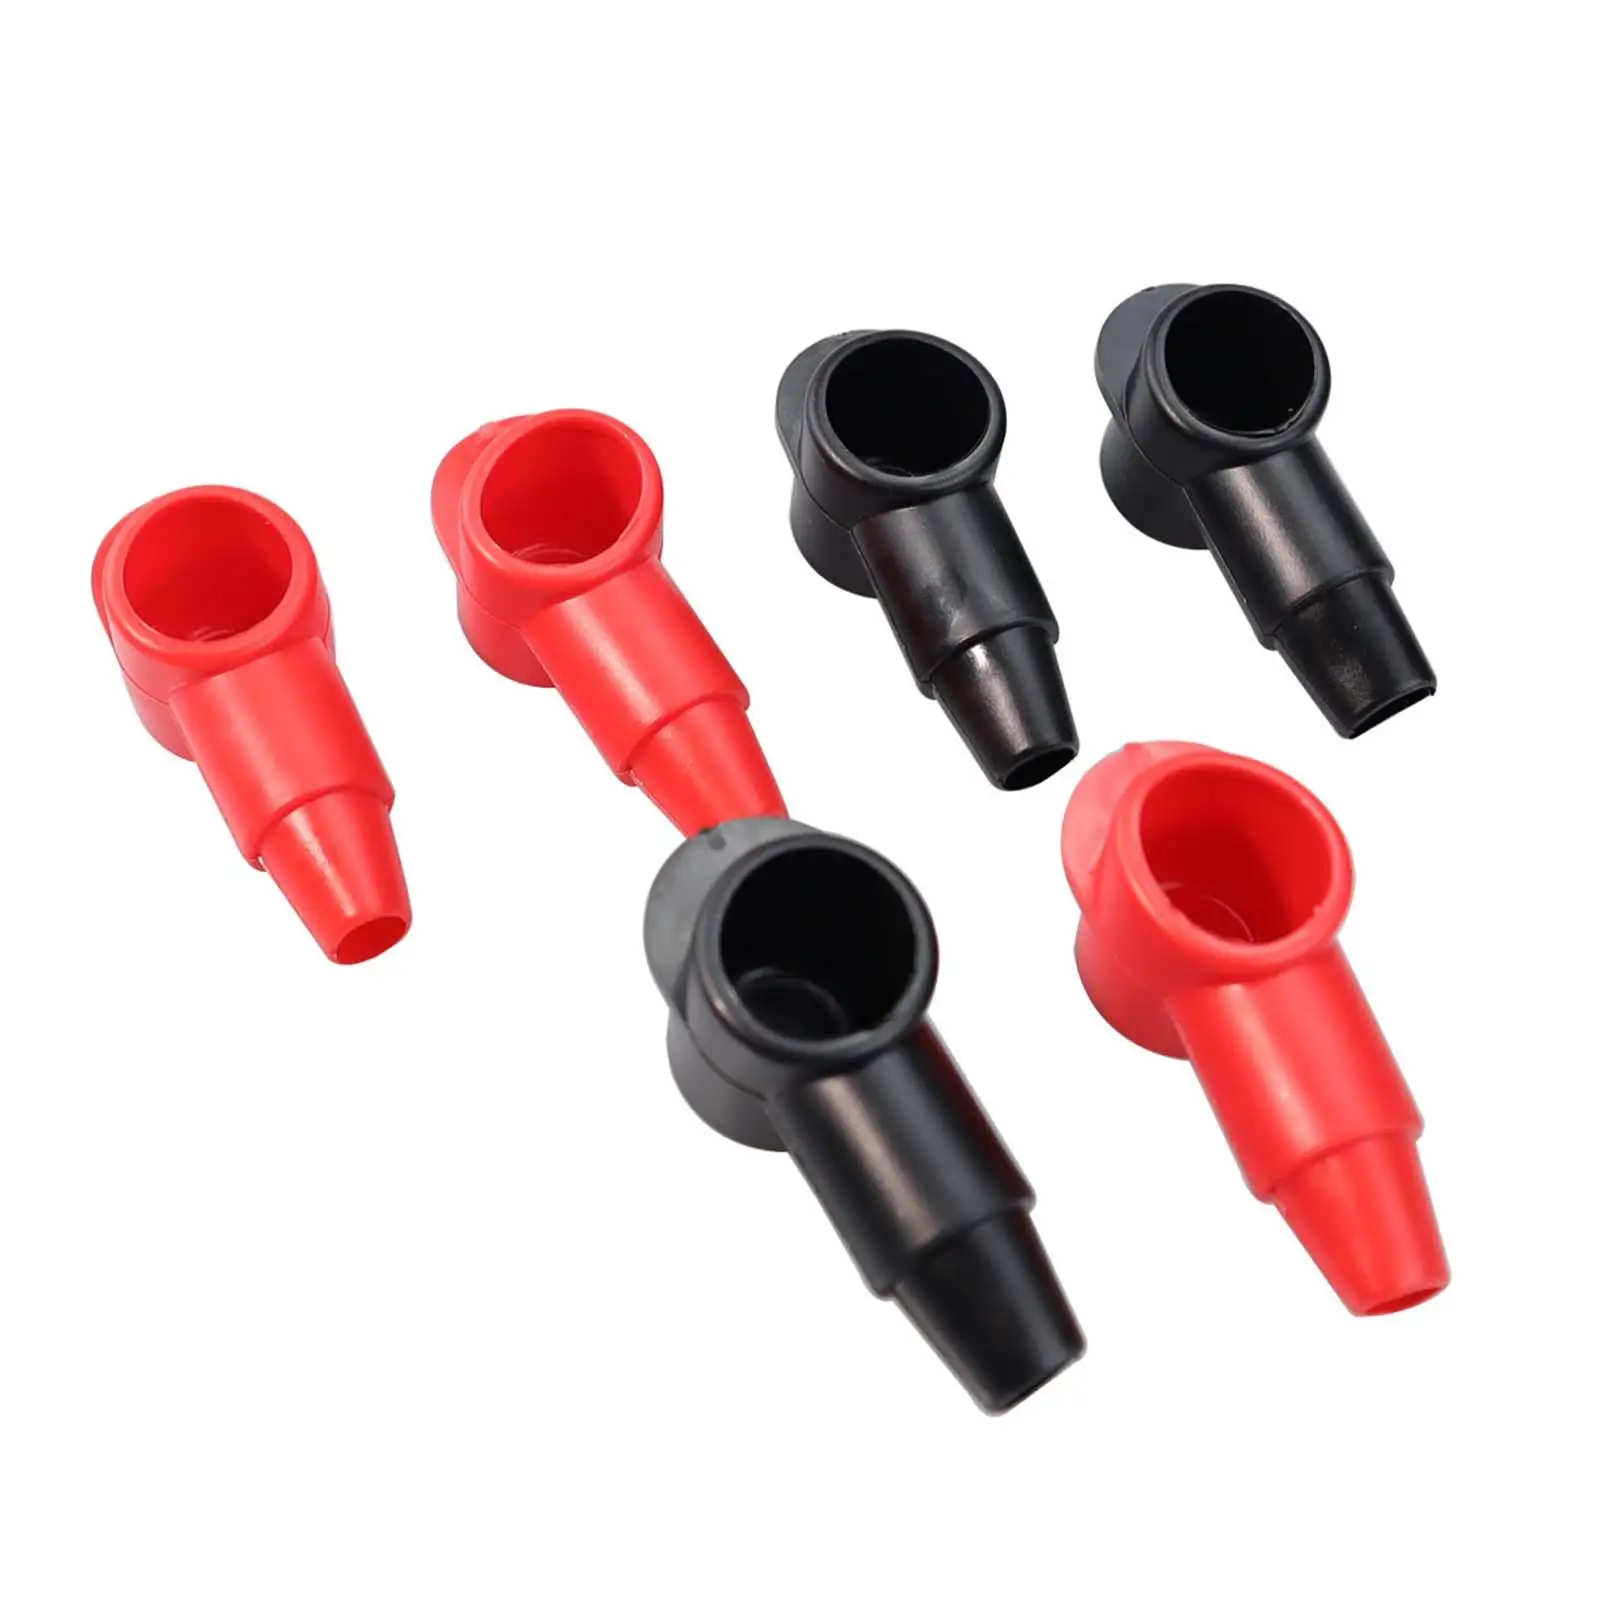 Car Battery Terminal Covers Durable Red and Black Protective Terminal Insulating Cover Terminal Caps for Marine Automotive